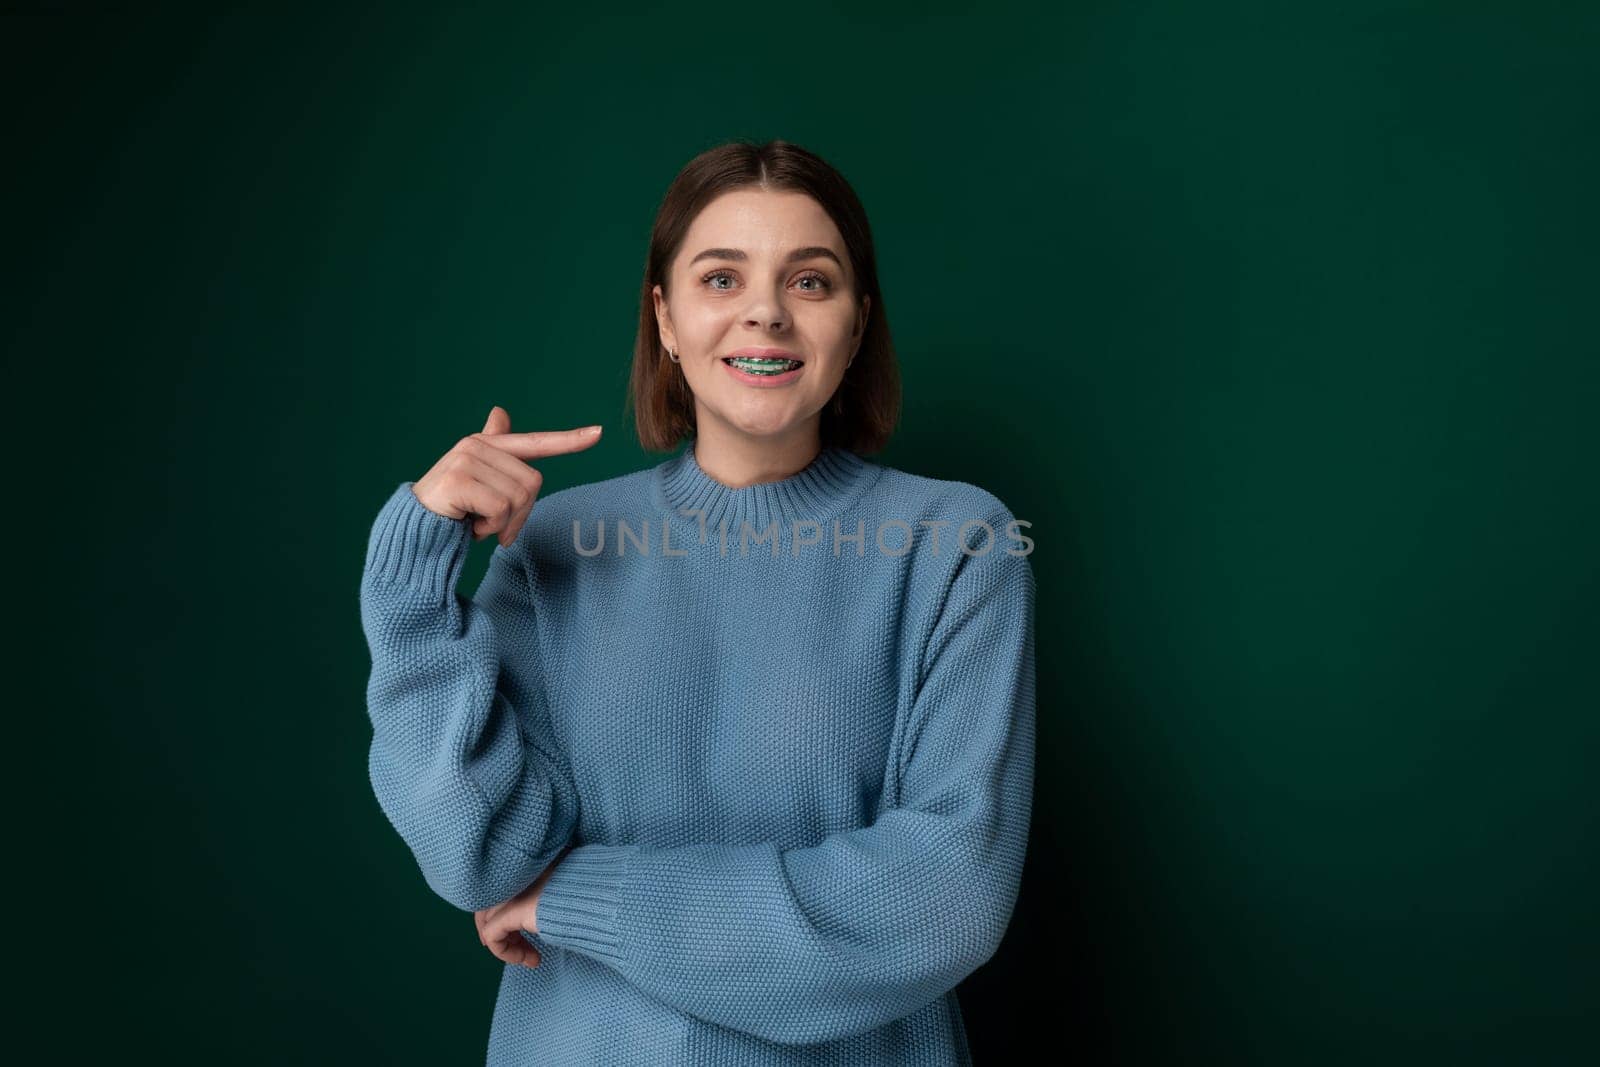 A woman wearing a blue sweater is pointing at an unseen object with a serious expression, indicating curiosity or interest. She is standing against a neutral background, focusing all attention on her gesture.